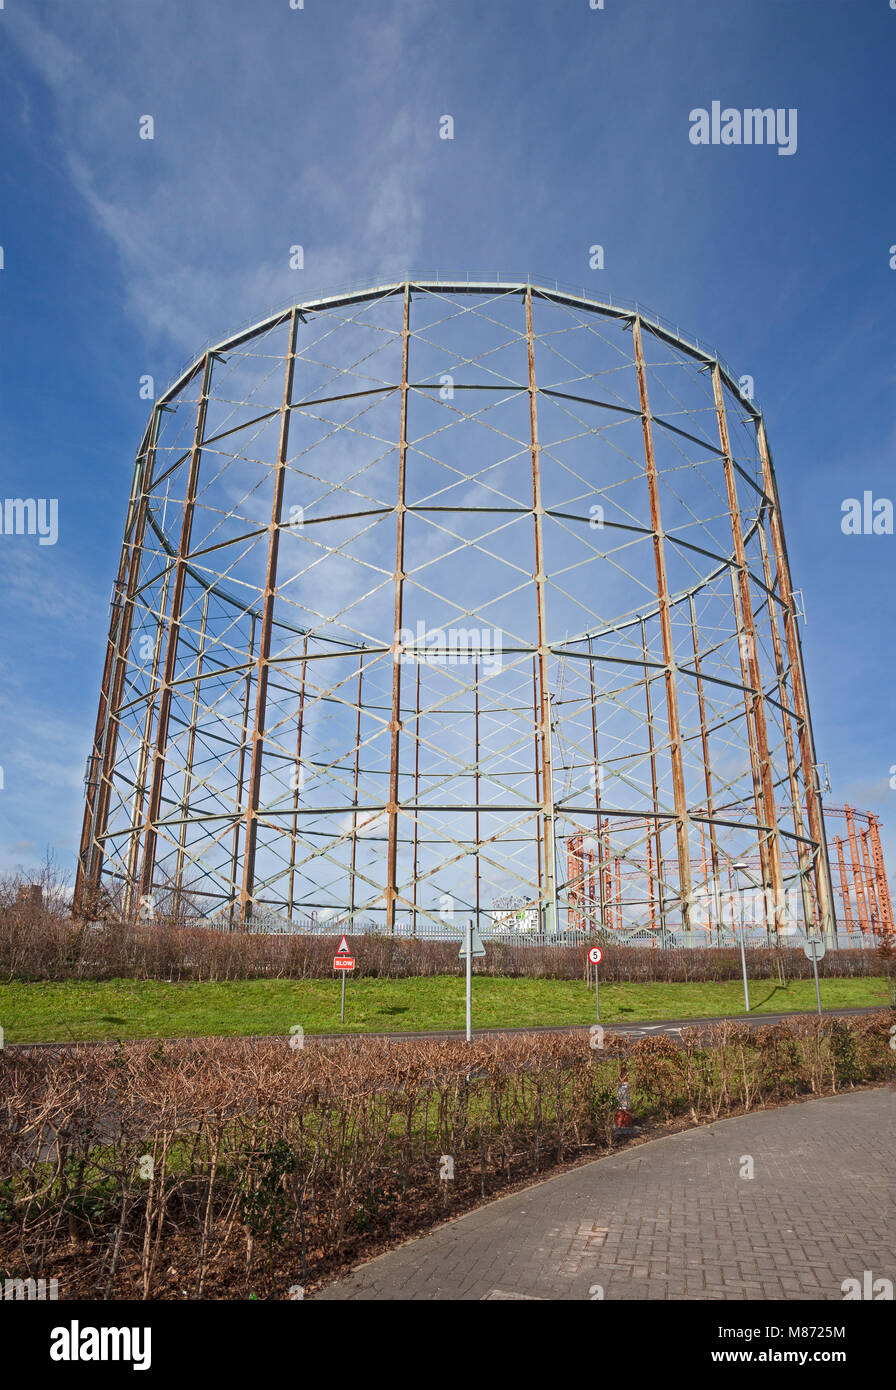 London, Borough of Southwark  The Grade II listed Victorian Gas holder No 13 of 1879 - 1881 off the Old Kent Road. Originally, the world's largest. Stock Photo